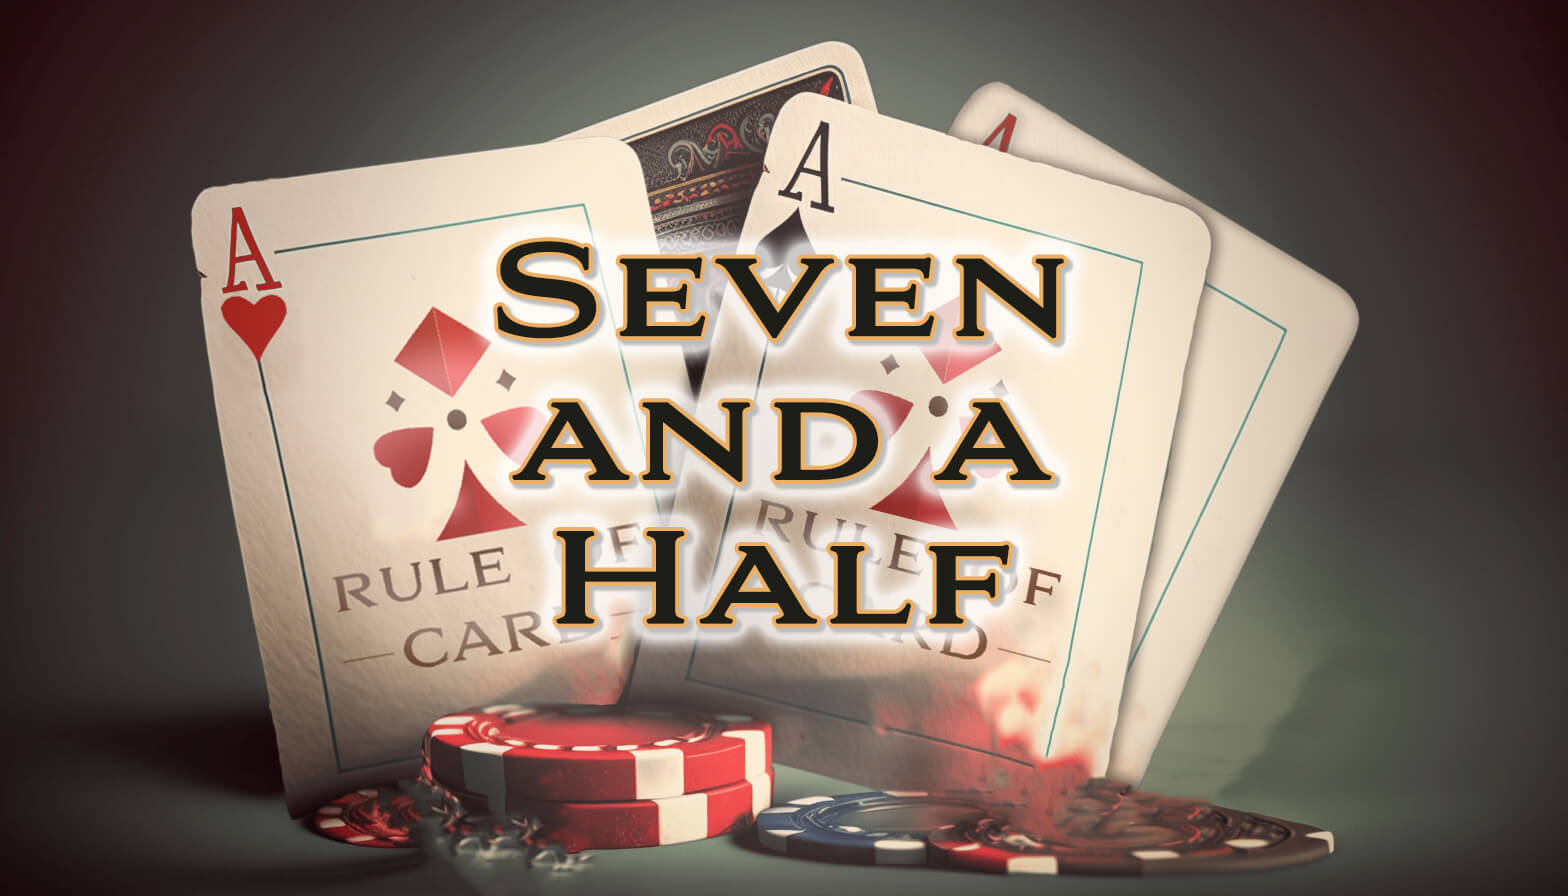 Playing the card game Seven and a Half